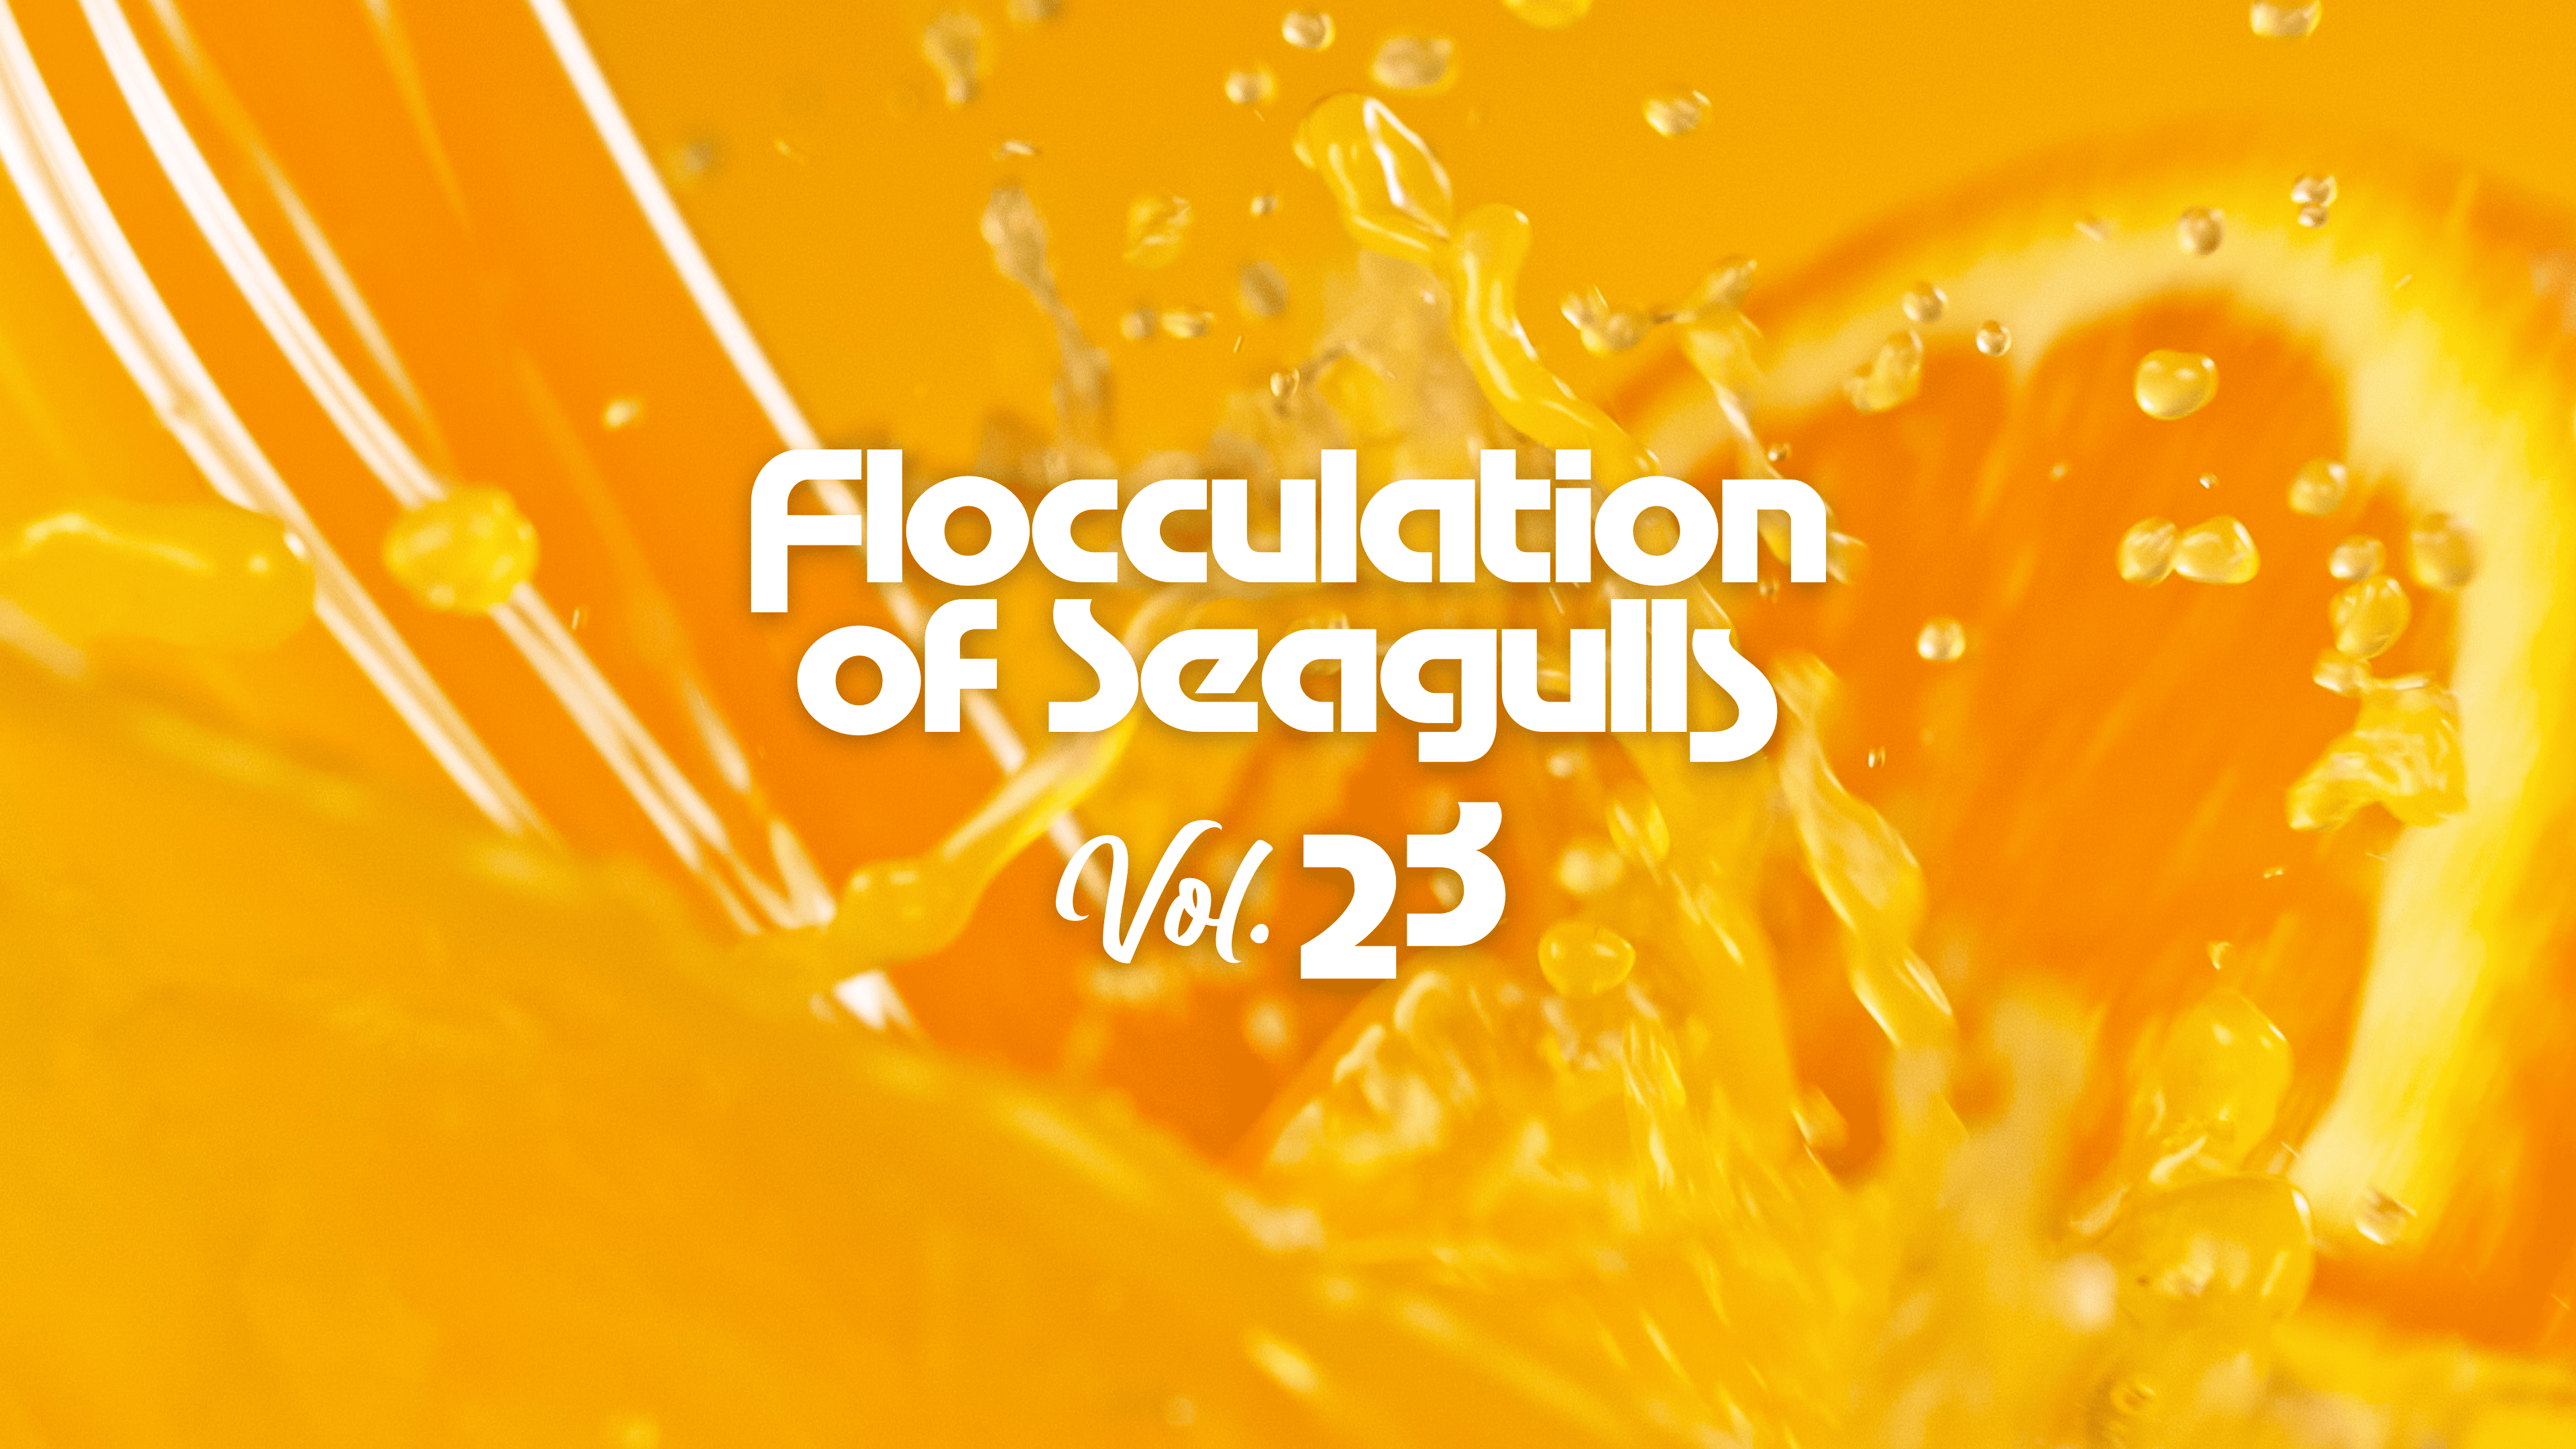 Flocculation of Seagulls Vol.23 Release at On Rotation